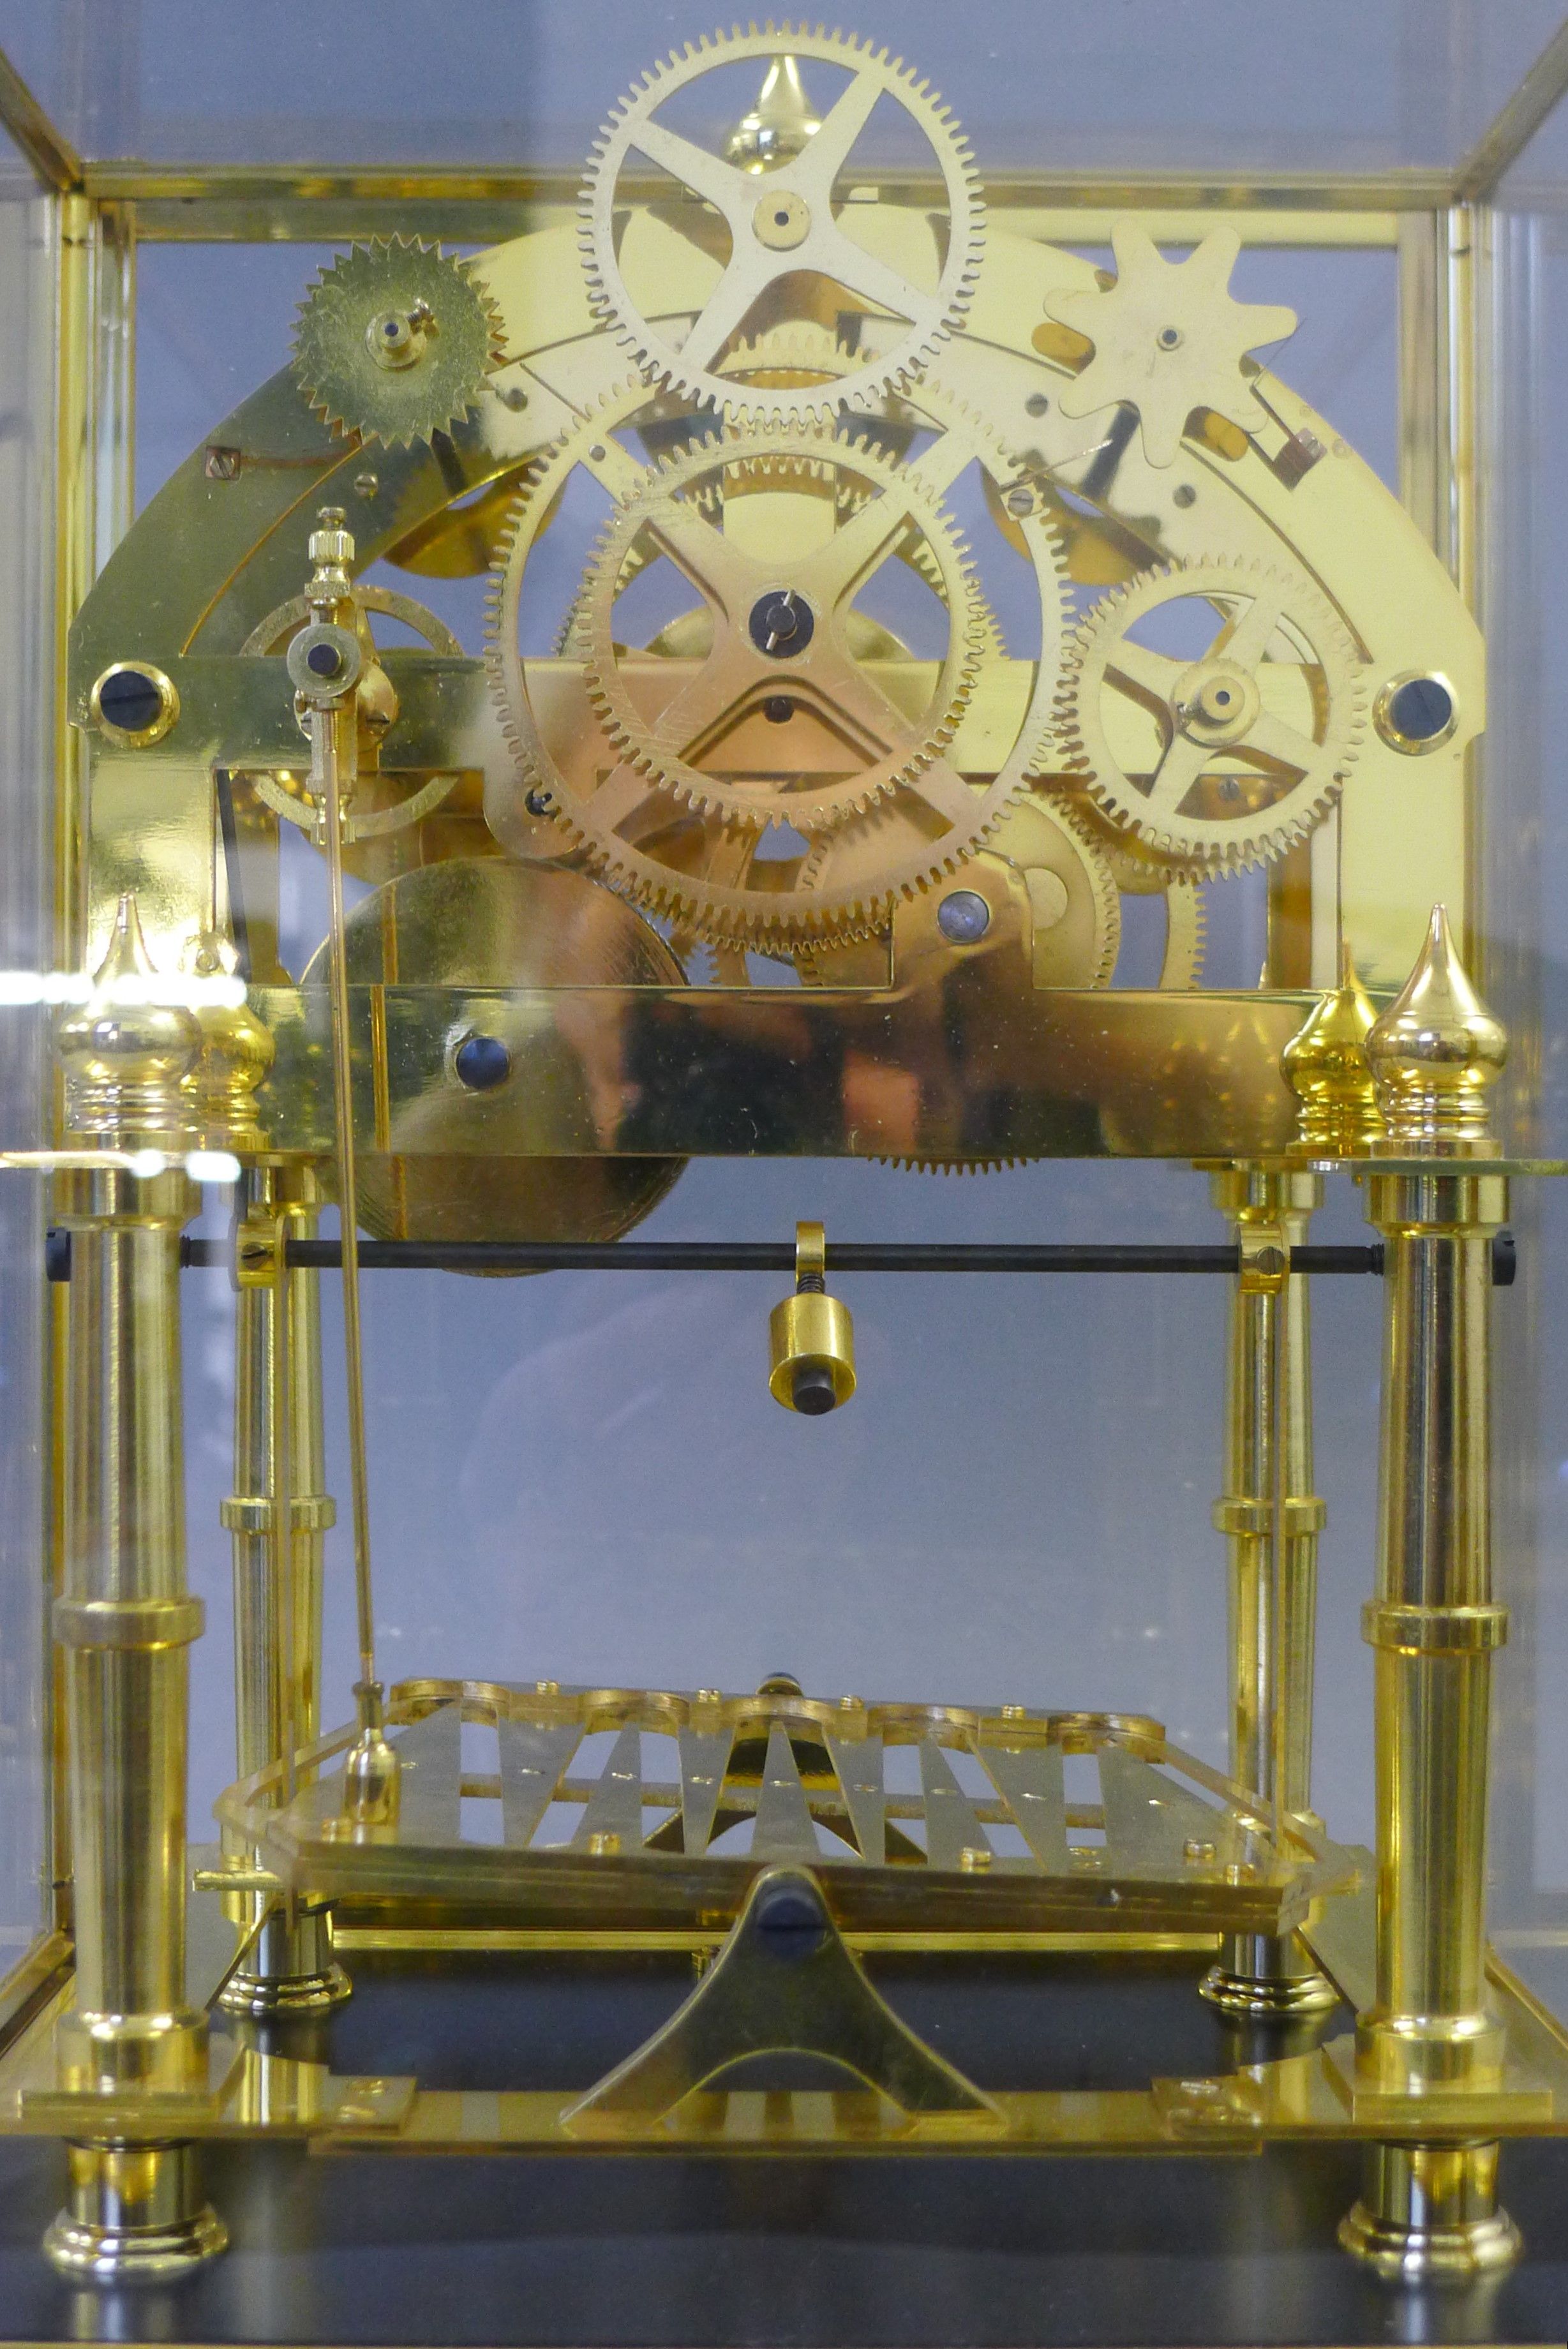 A moon phase congreave clock. 43 cm high. - Image 5 of 5